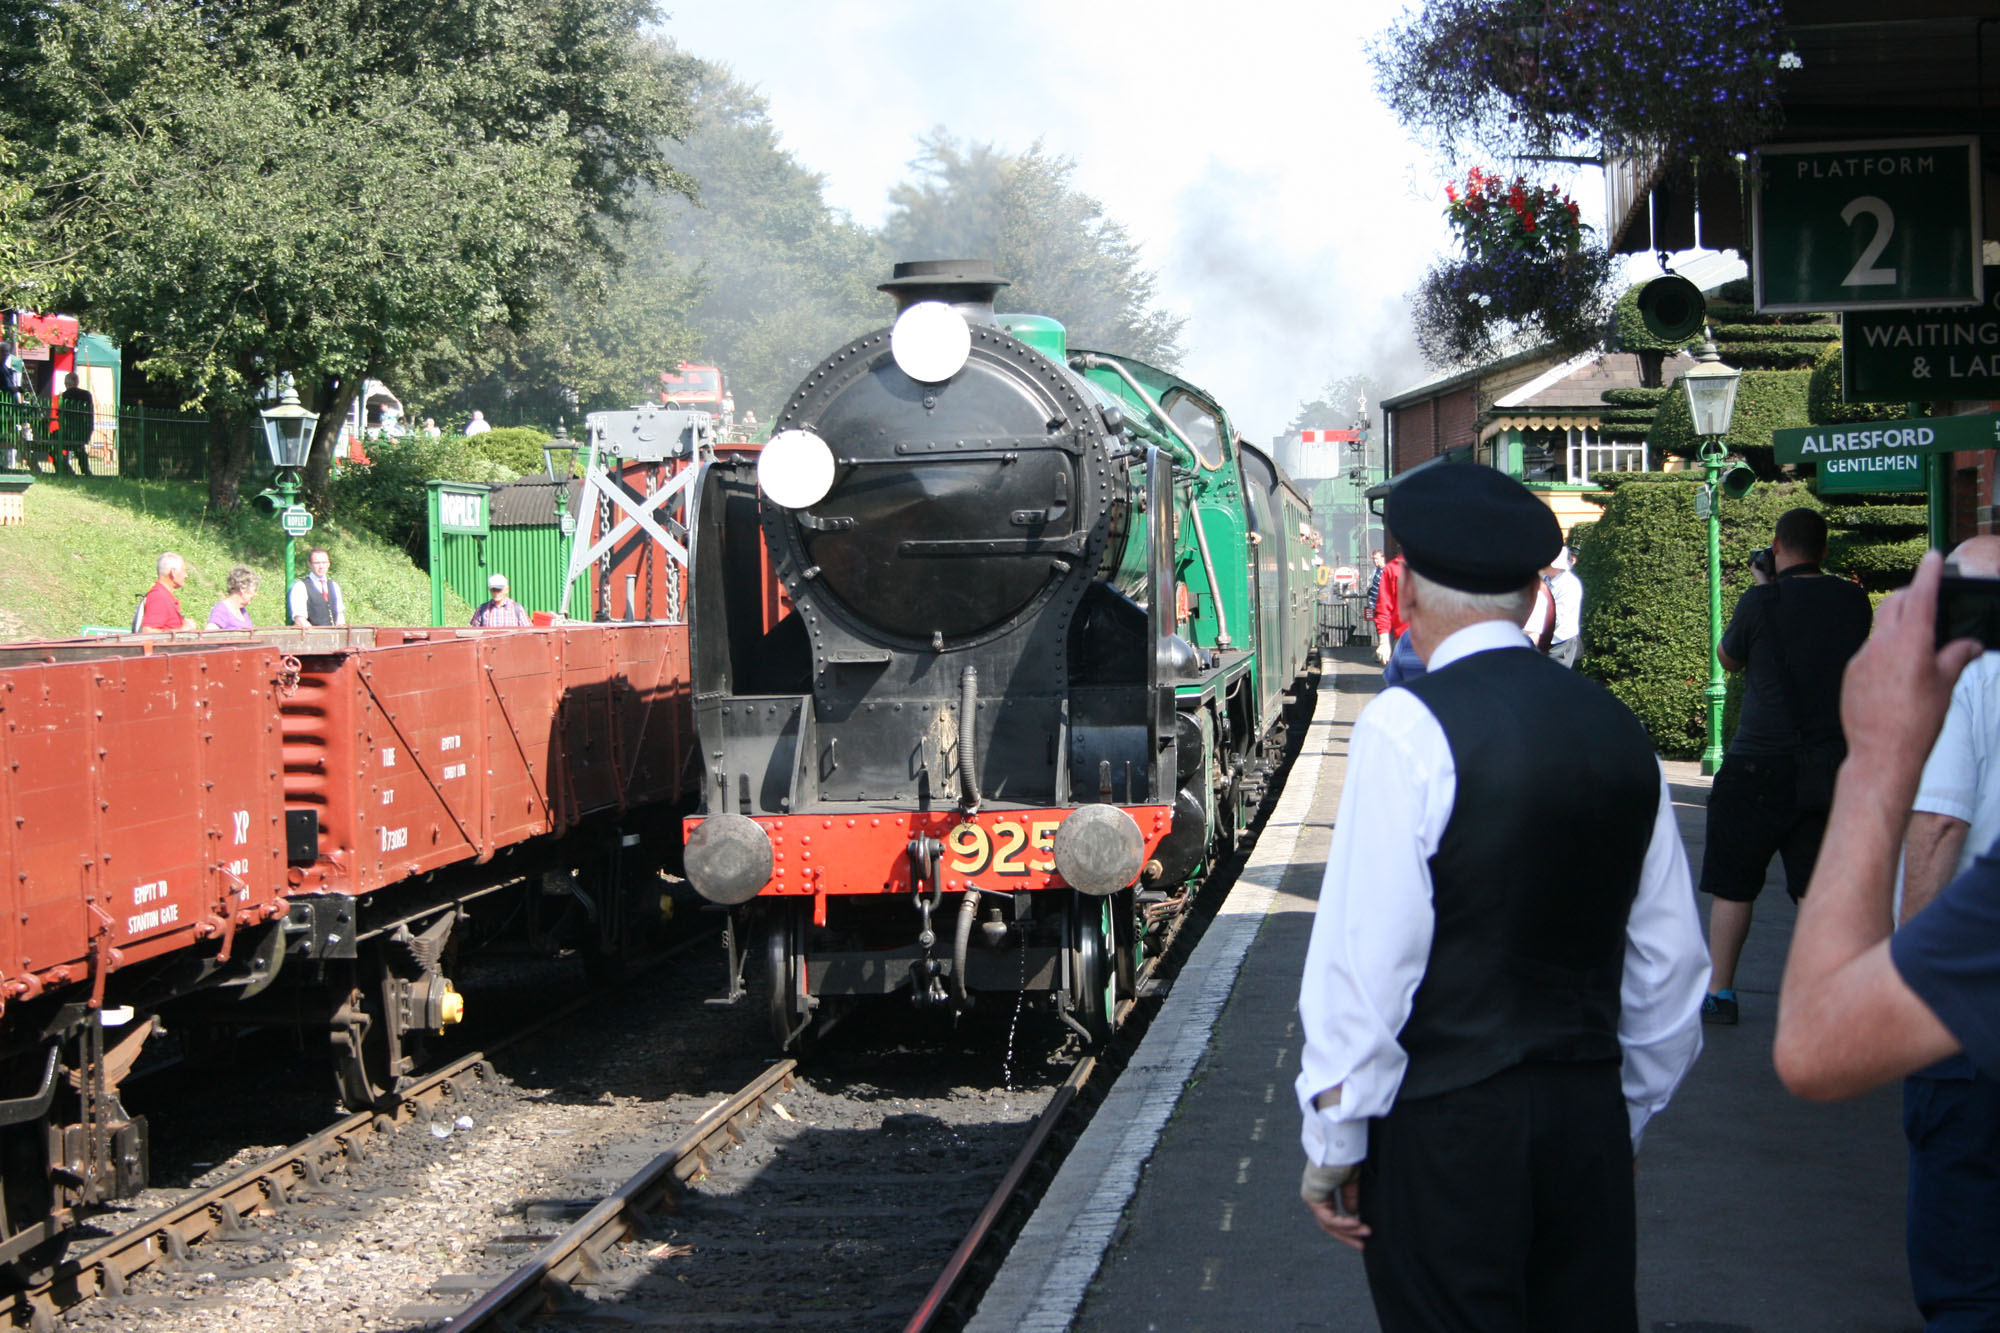 925 Cheltenham waiting to depart from Ropley for Alresford. 9th September 2012. Dave Mant